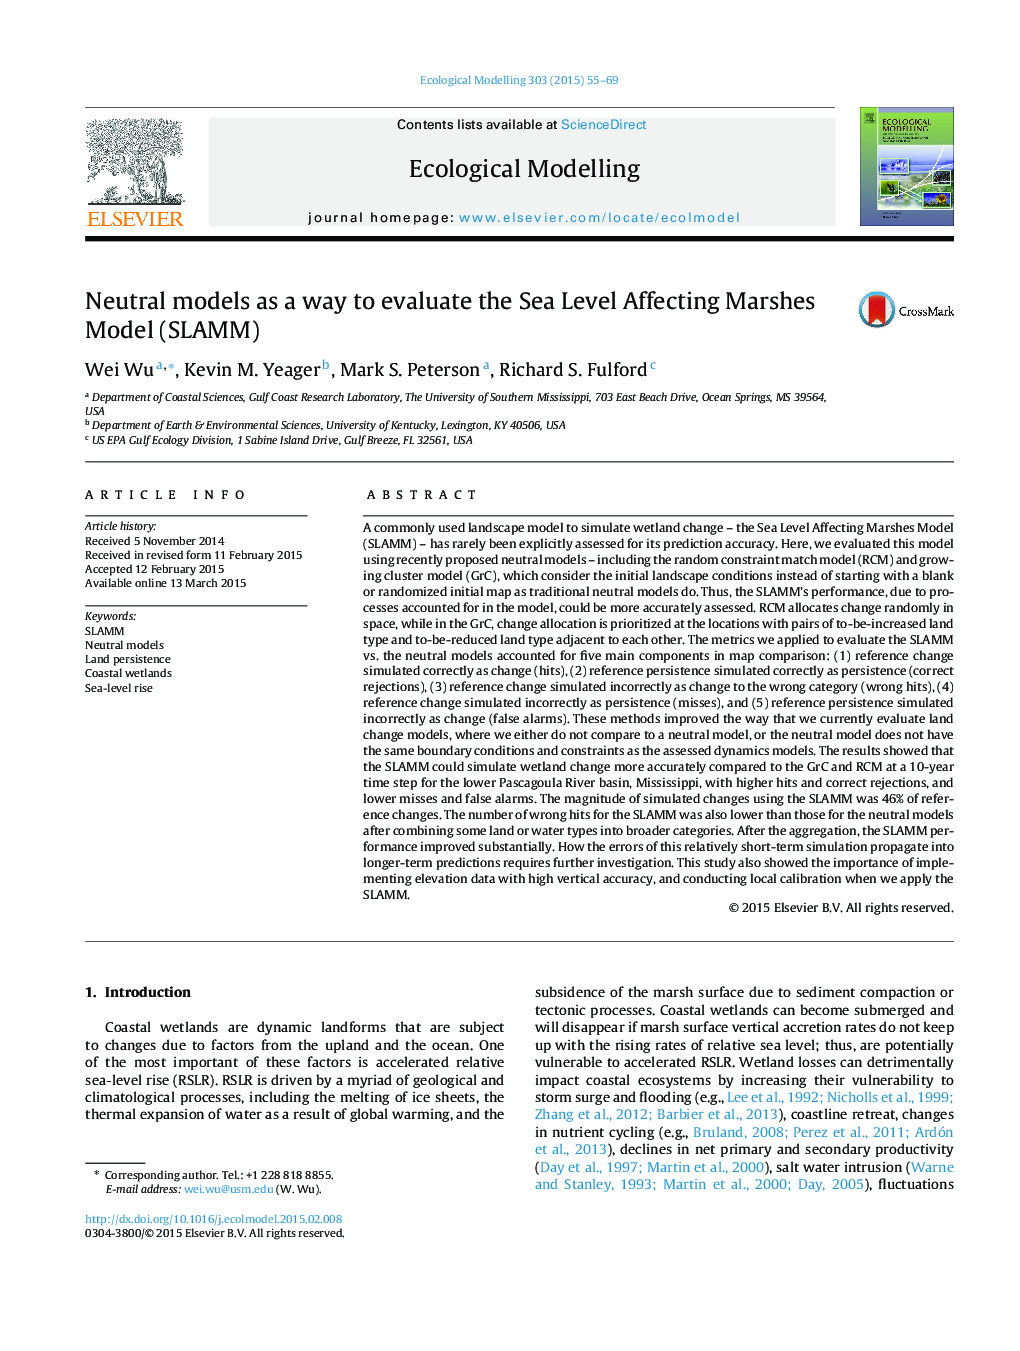 Neutral models as a way to evaluate the Sea Level Affecting Marshes Model (SLAMM)